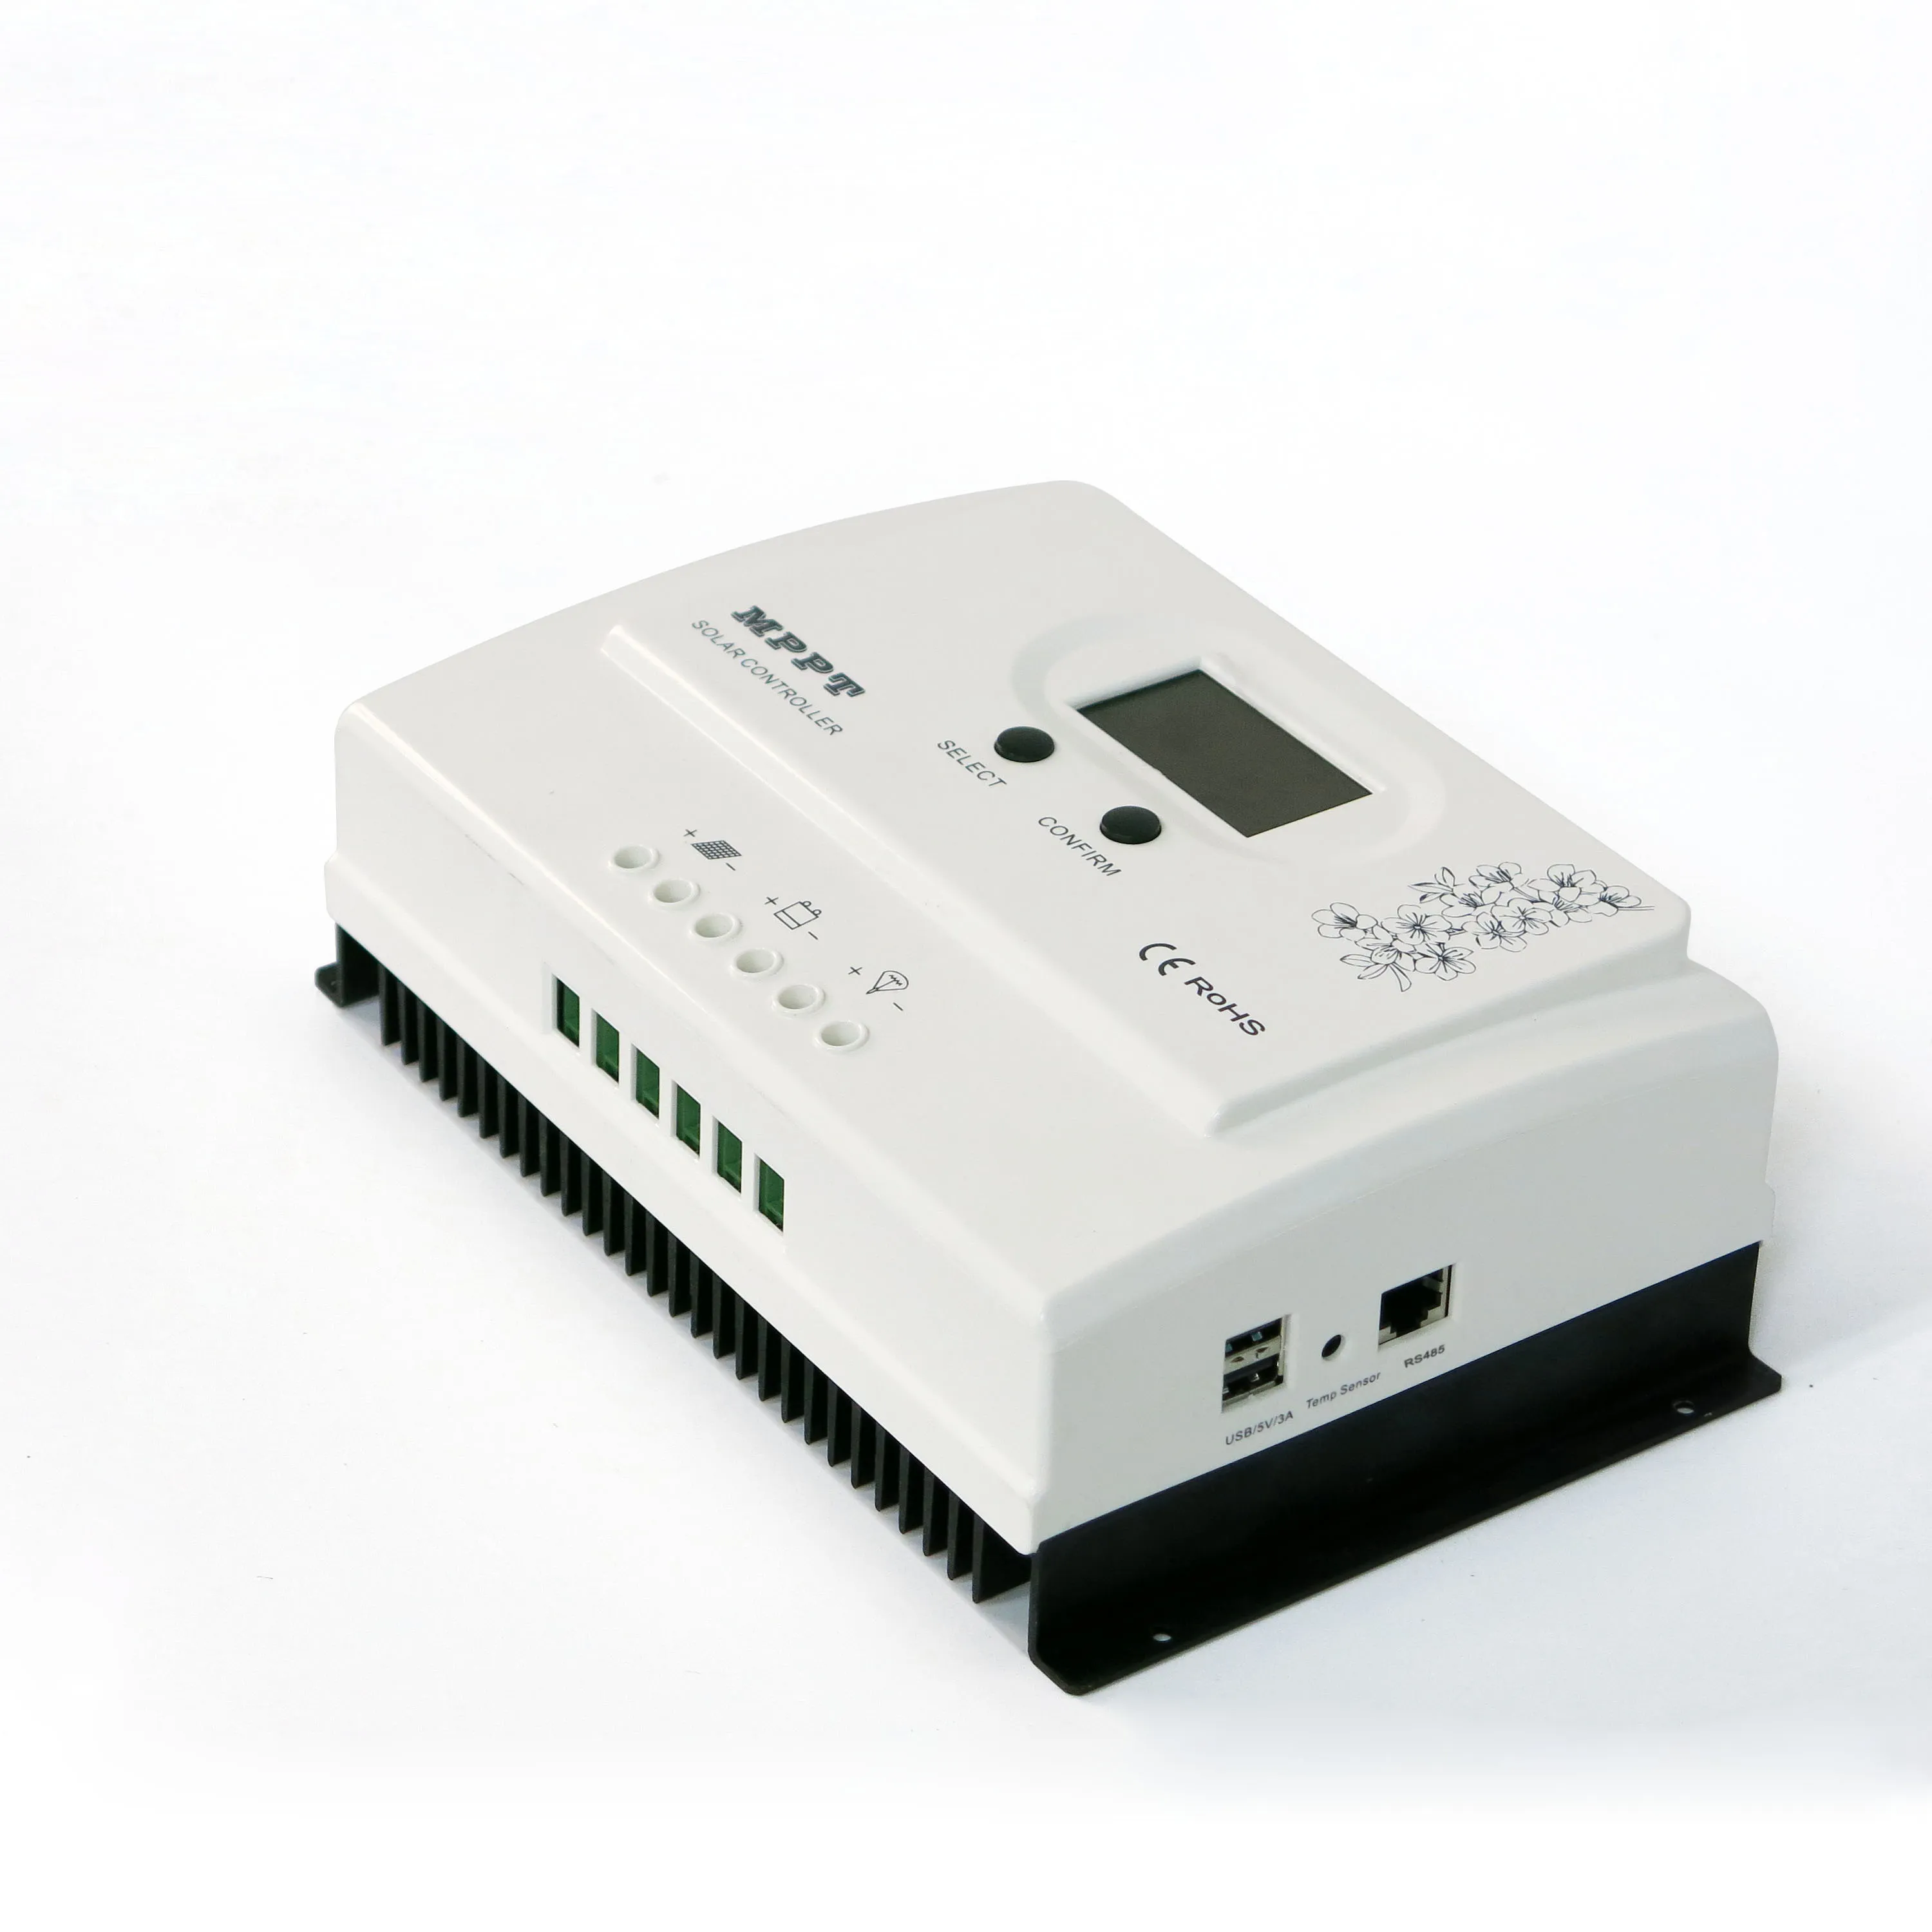 MPPT Solar Charge Controller 15A/20A/30A/40A/50A, DC12V/24V Automatic Recognition, with RS485 difault. (WIFI optional)